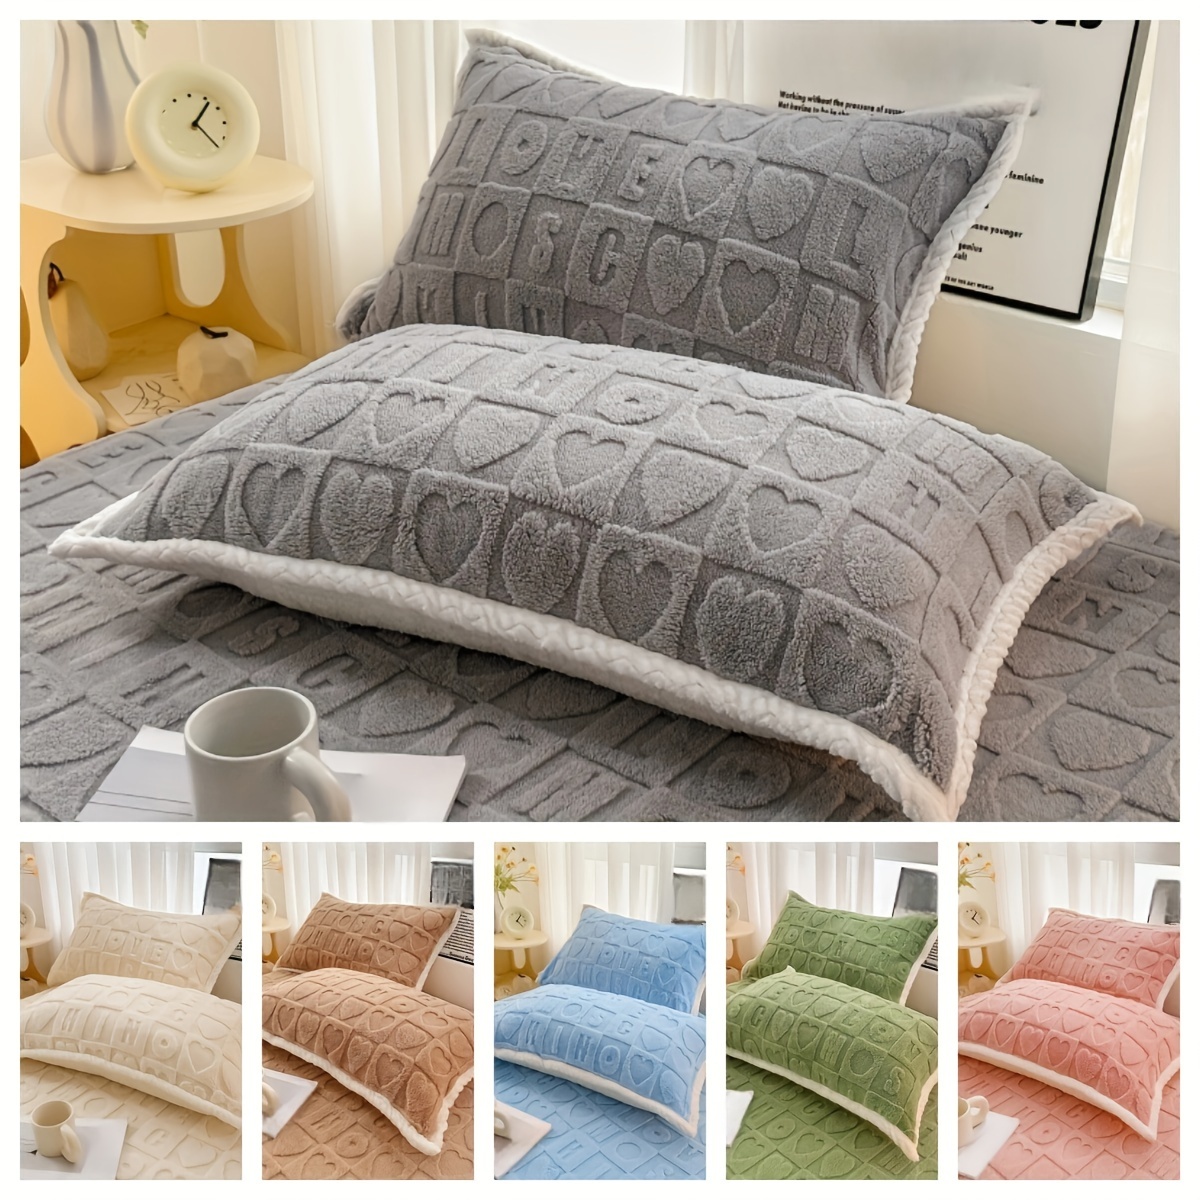 

2pcs Taffeta Solid Color Jacquard Pillowcase (thickened Pillowcase, Without Pillow Core) Soft Breathable Pillowcase, Machine Washable